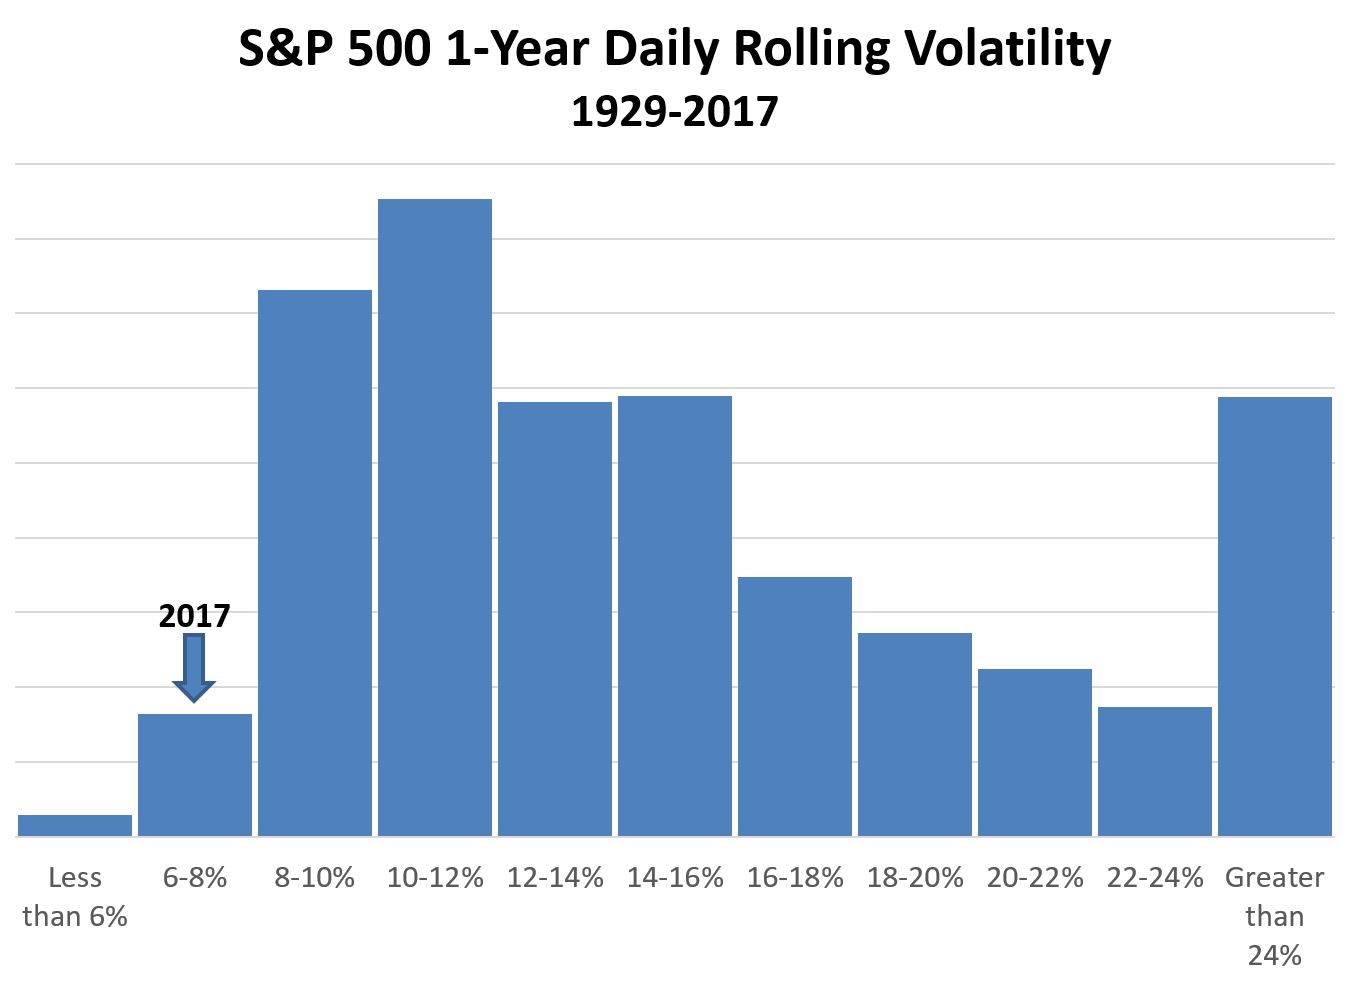 SPX 1-Year Daily Rolling Volatility